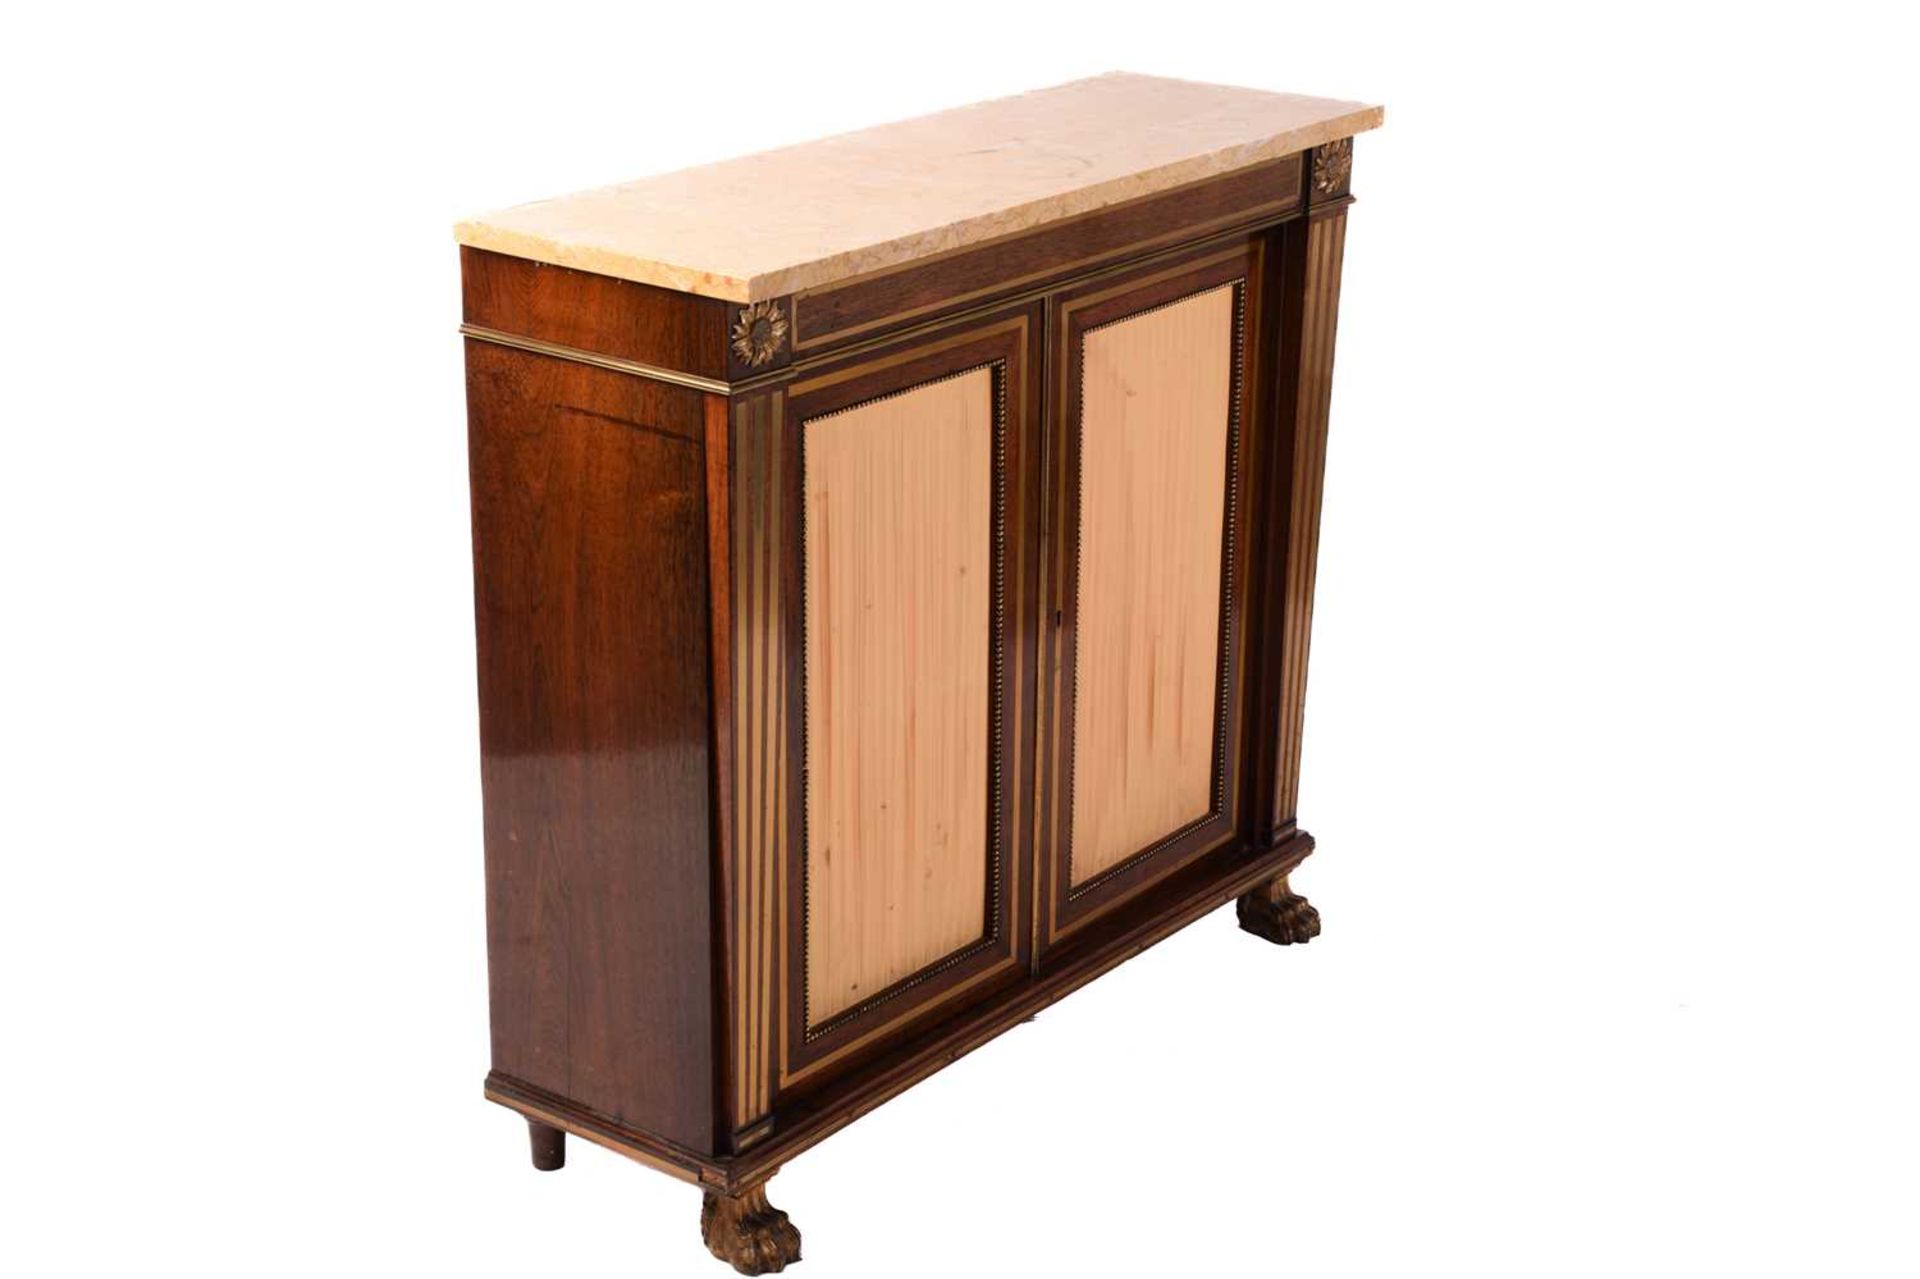 A Regency brass inlaid rosewood chiffonier in the manner of John Maclean, with sienna marble top, - Image 4 of 8